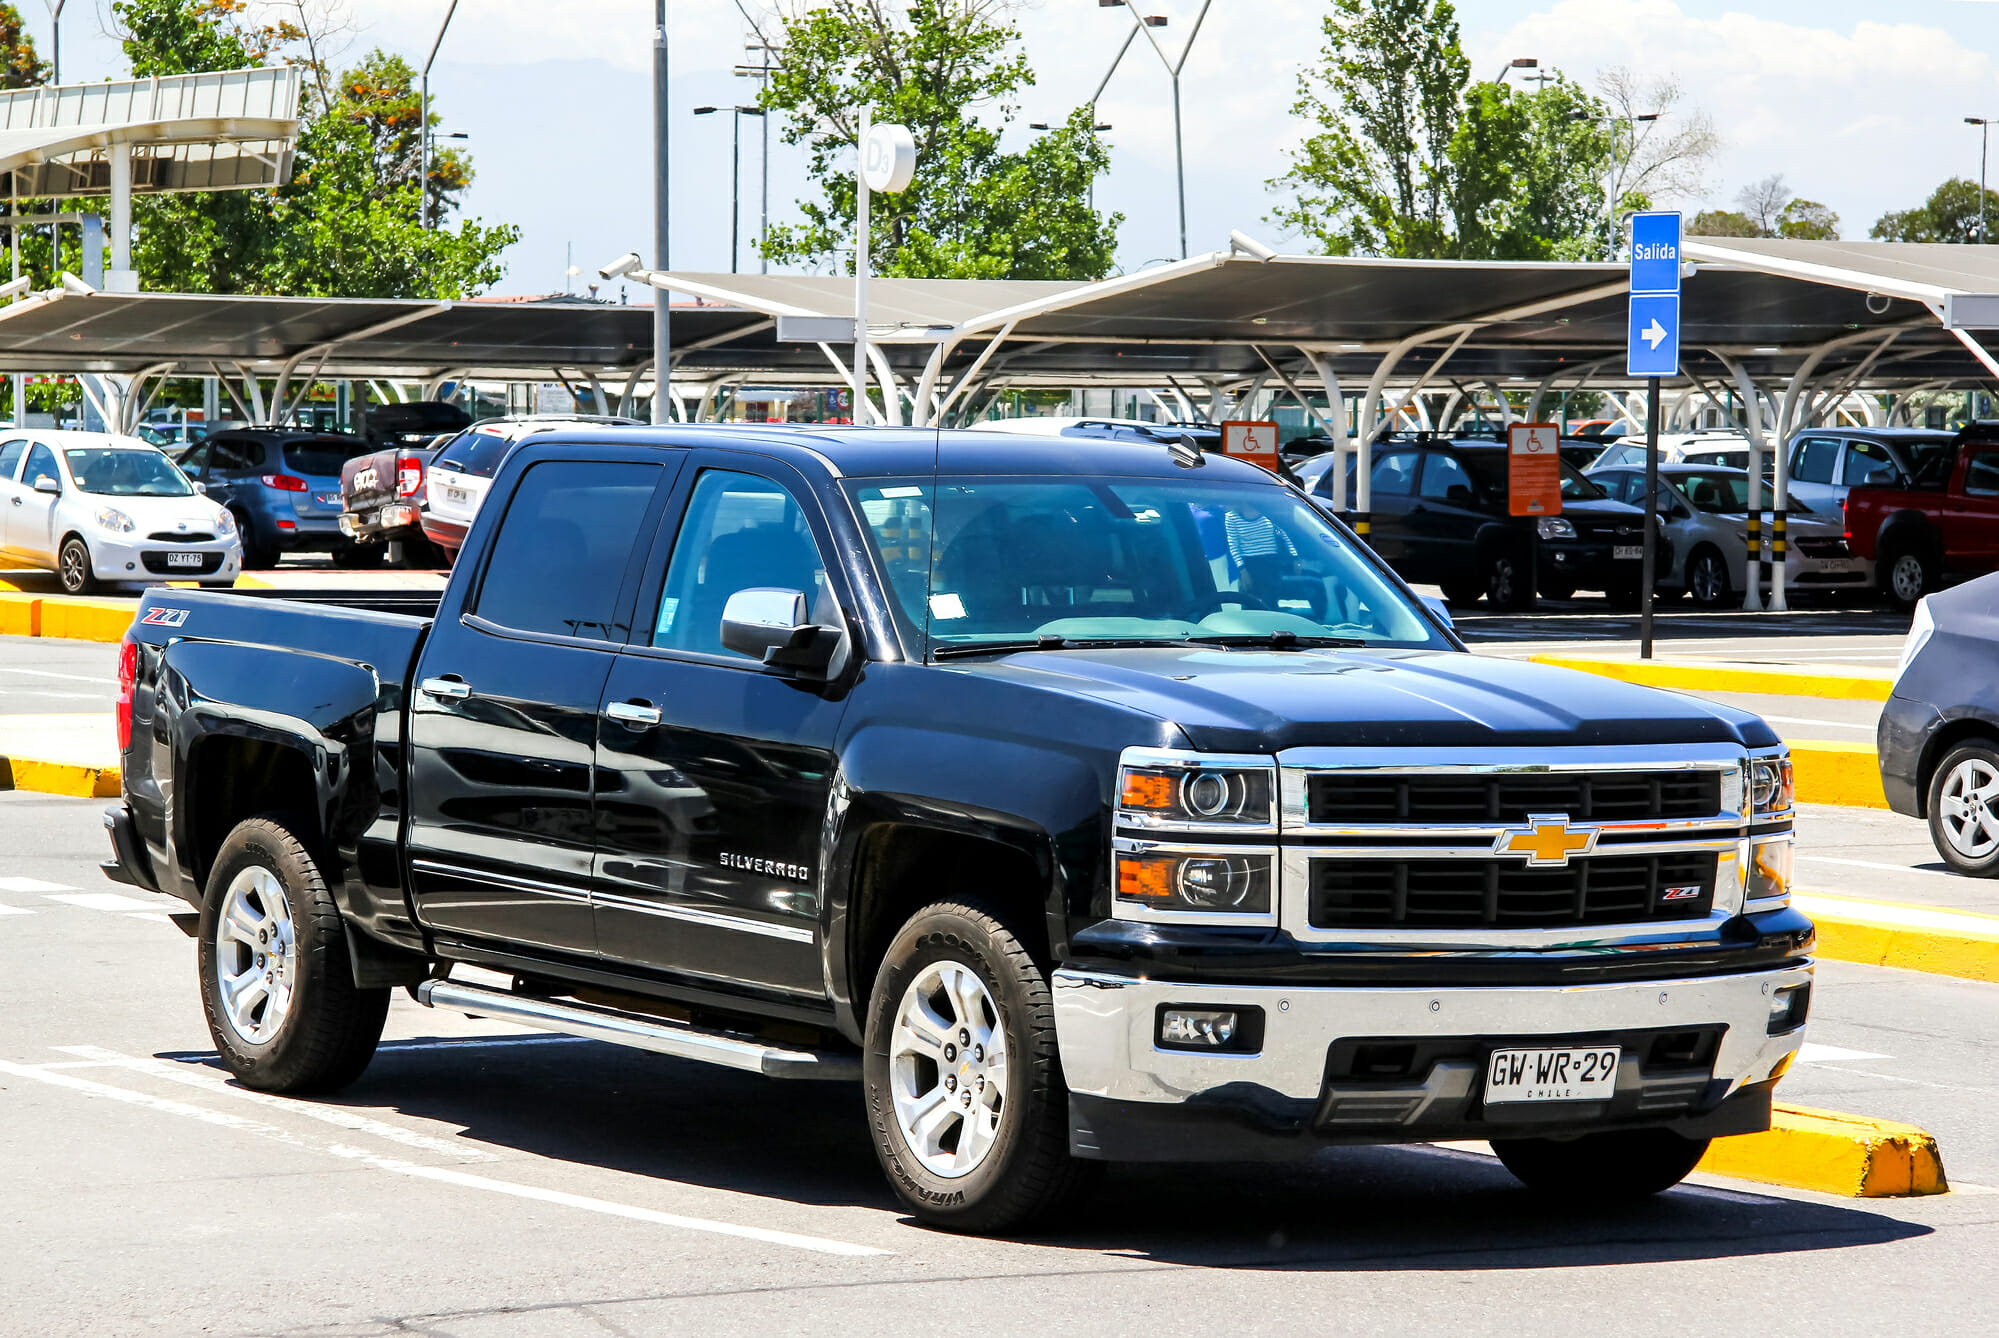 2015 Chevrolet Silverado Review: A Capable Full-Size Truck with a Luxurious Interior